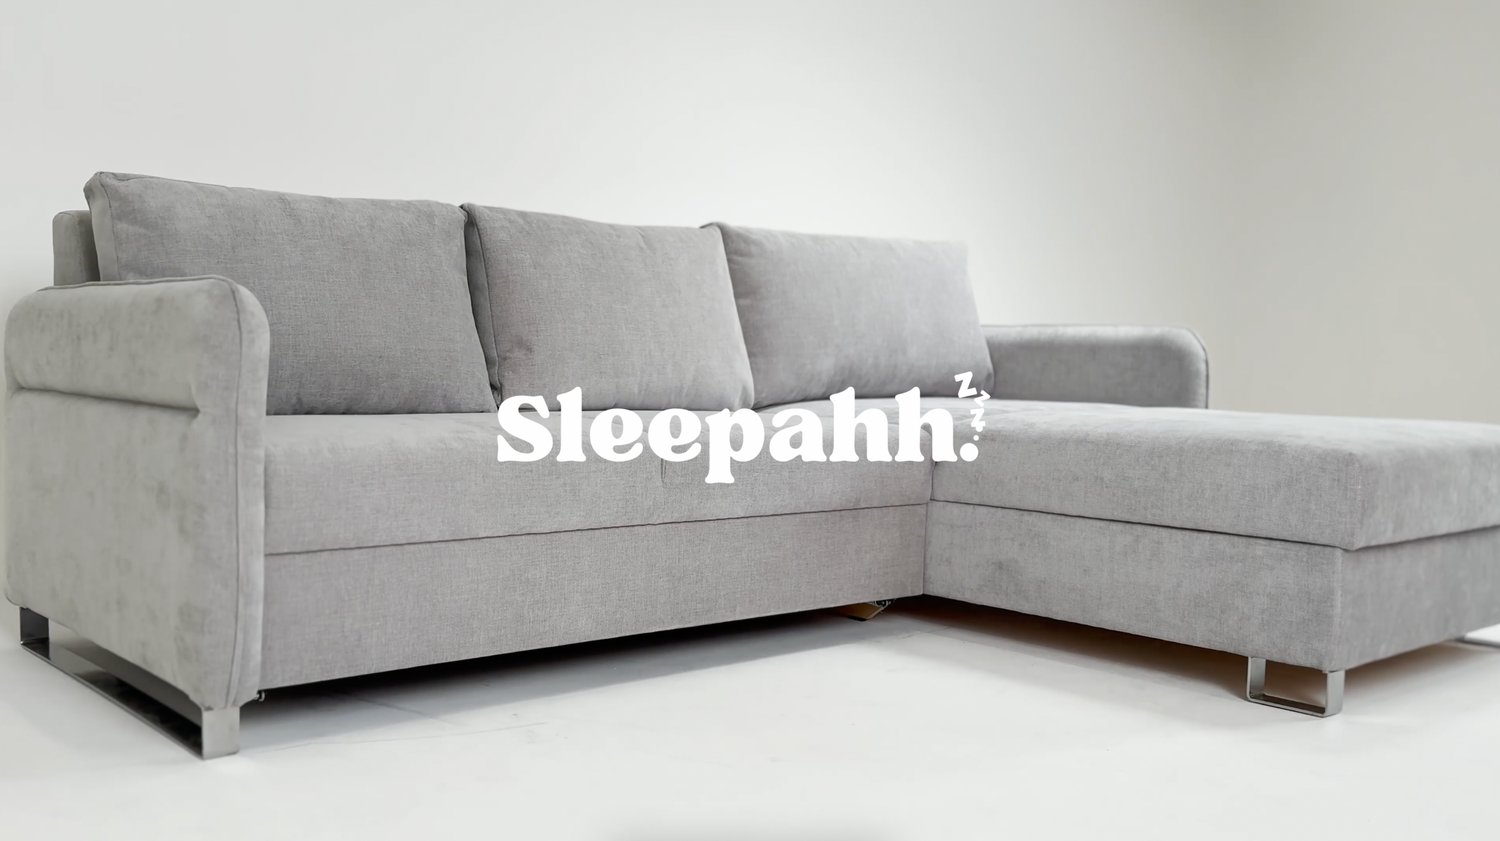 Load video: This is a video showing the Sleepahh sofa bed and some of its features.